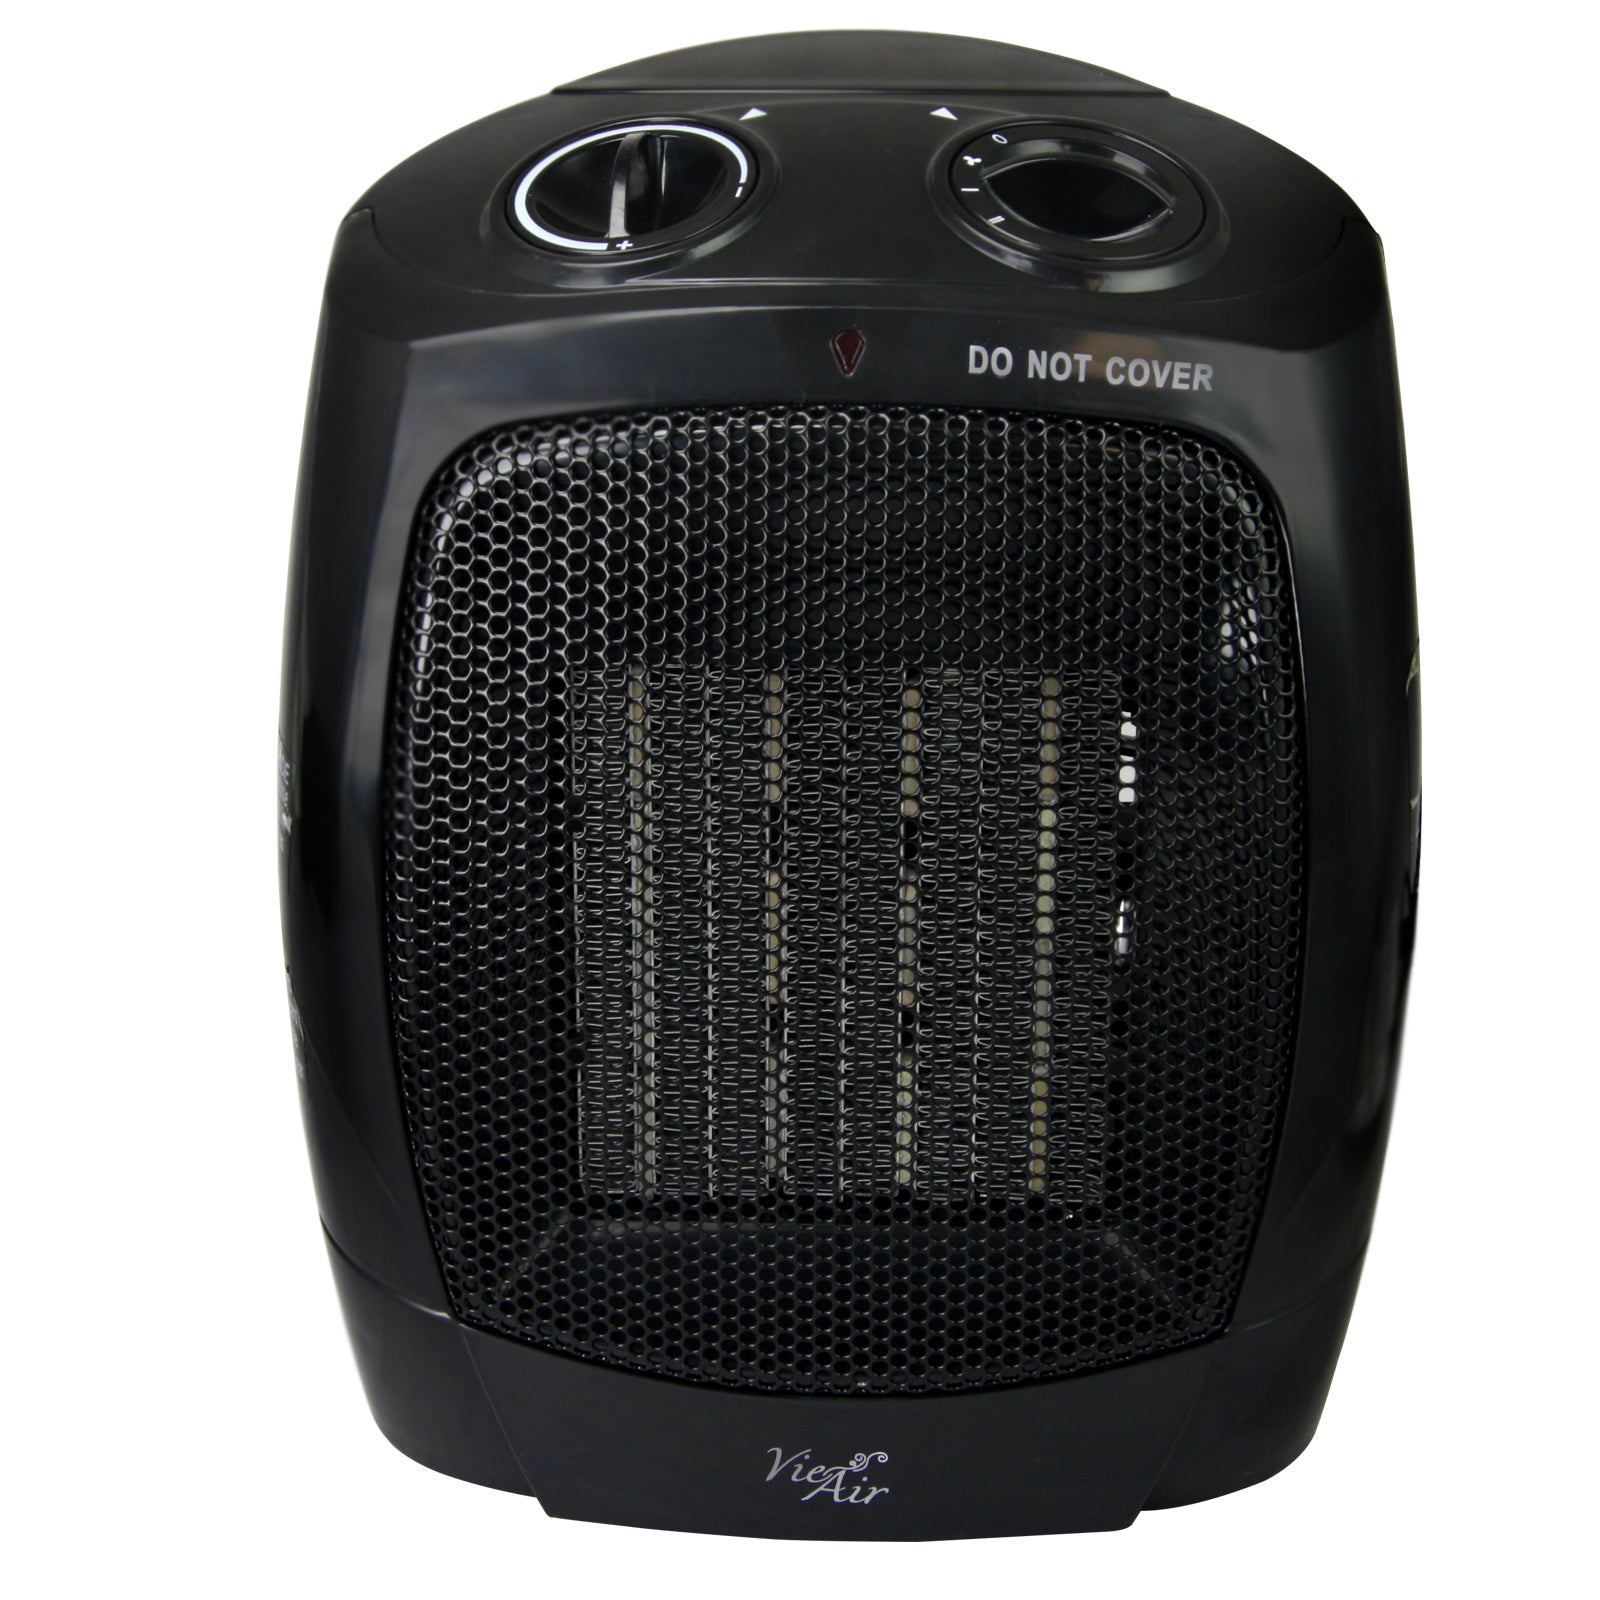 VIE AIR Vie Air 1500W Portable 2-Settings Office Black Ceramic Heater with Adjustable Thermostat